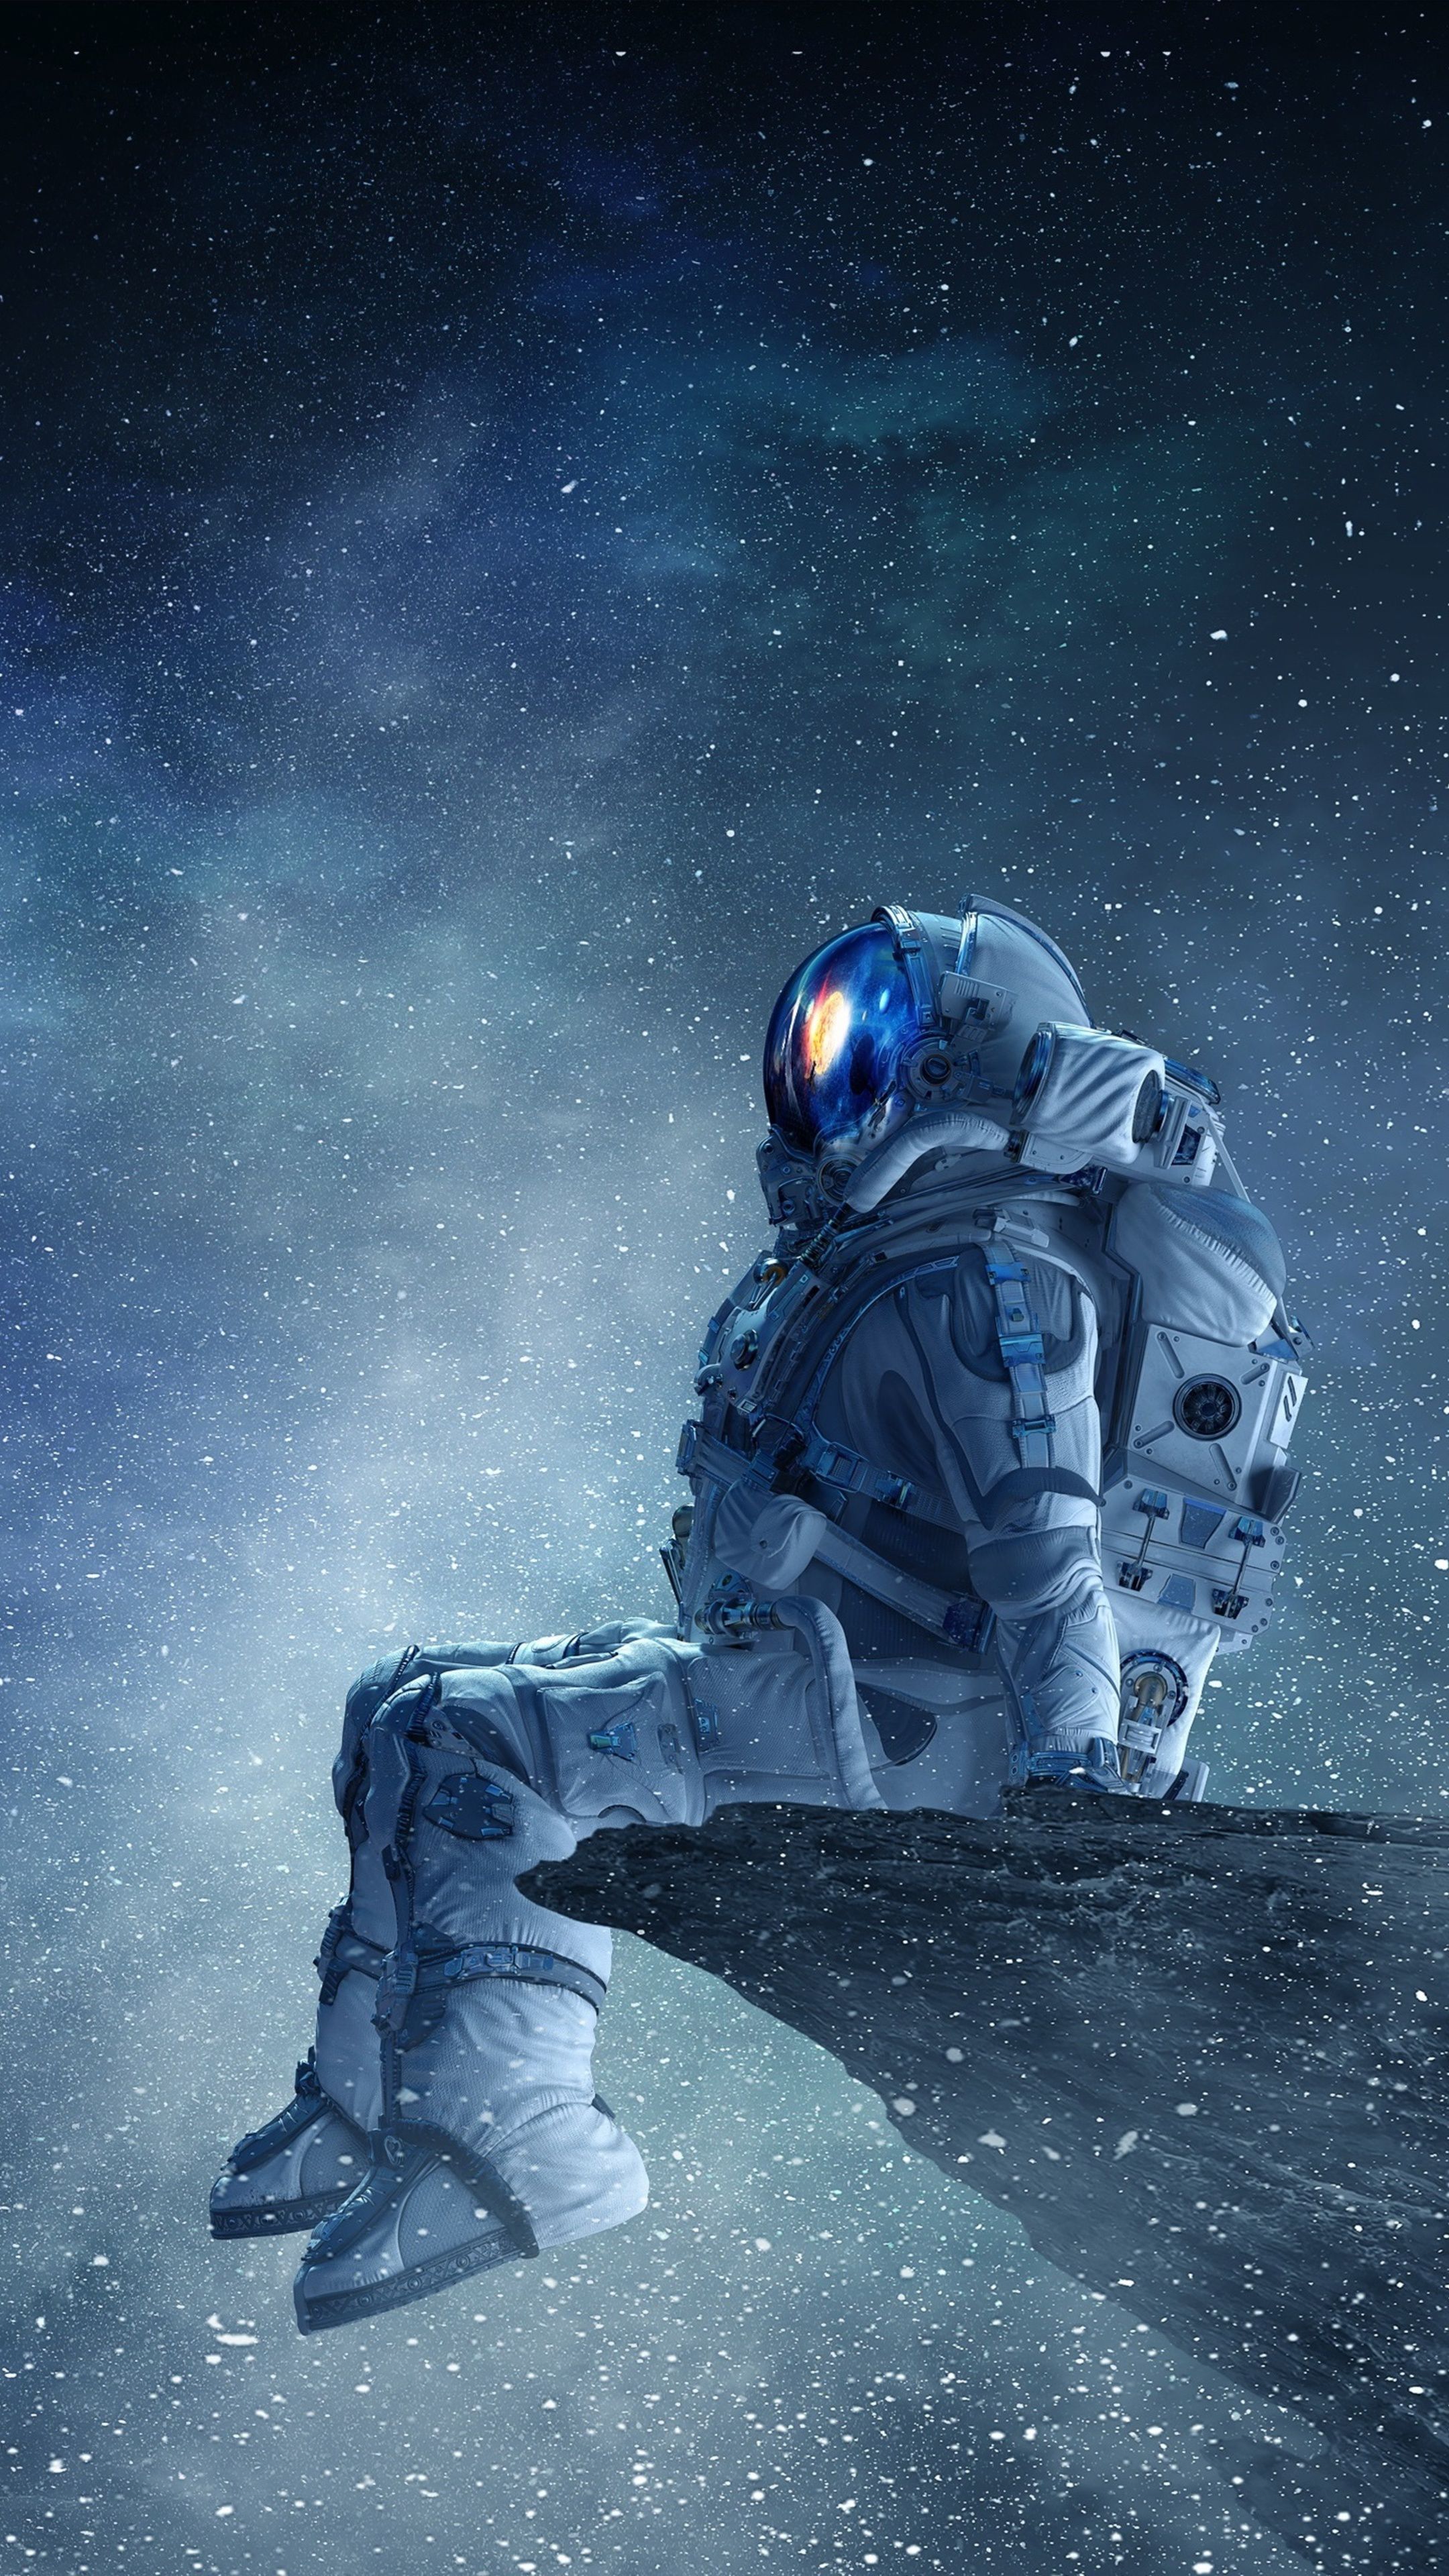 Astronaut Space Iphone Wallpaper 4K - We hope you enjoy our variety and